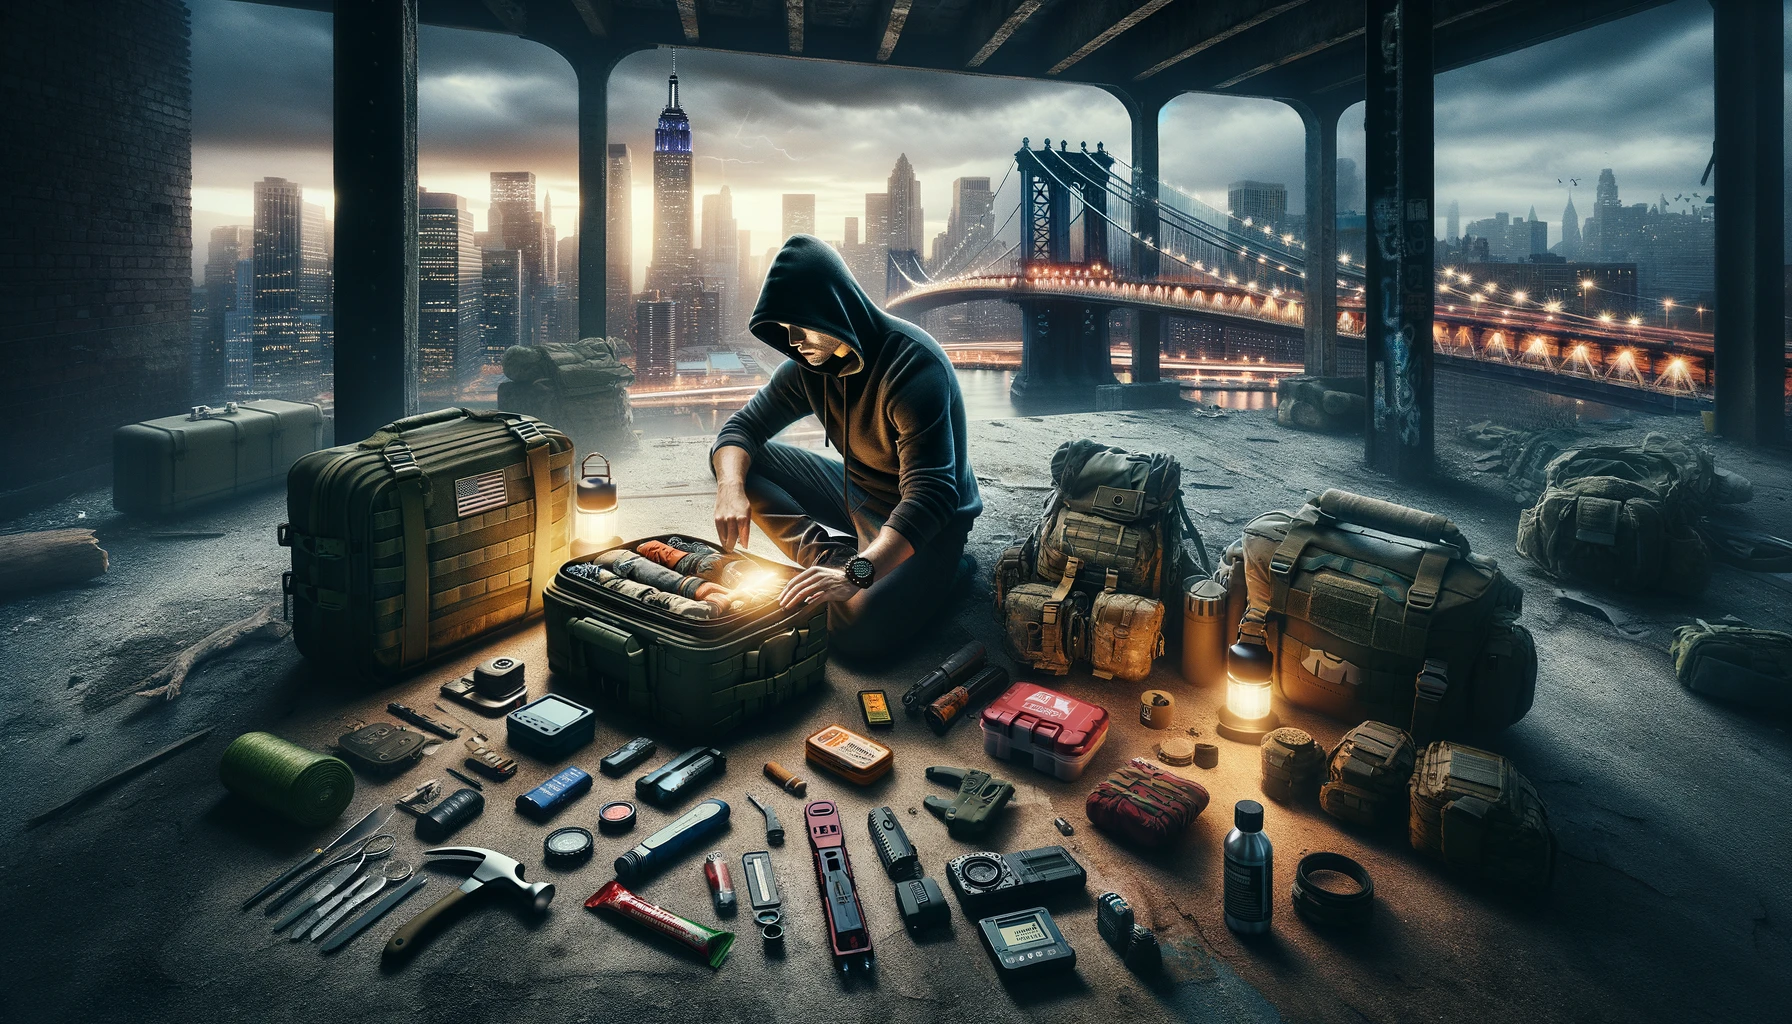 Prepper assembling an urban bug out bag with survival gear in an abandoned warehouse, showcasing strategic packing of advanced tools against the backdrop of urban decay and city lights, emphasizing preparedness and survival instinct